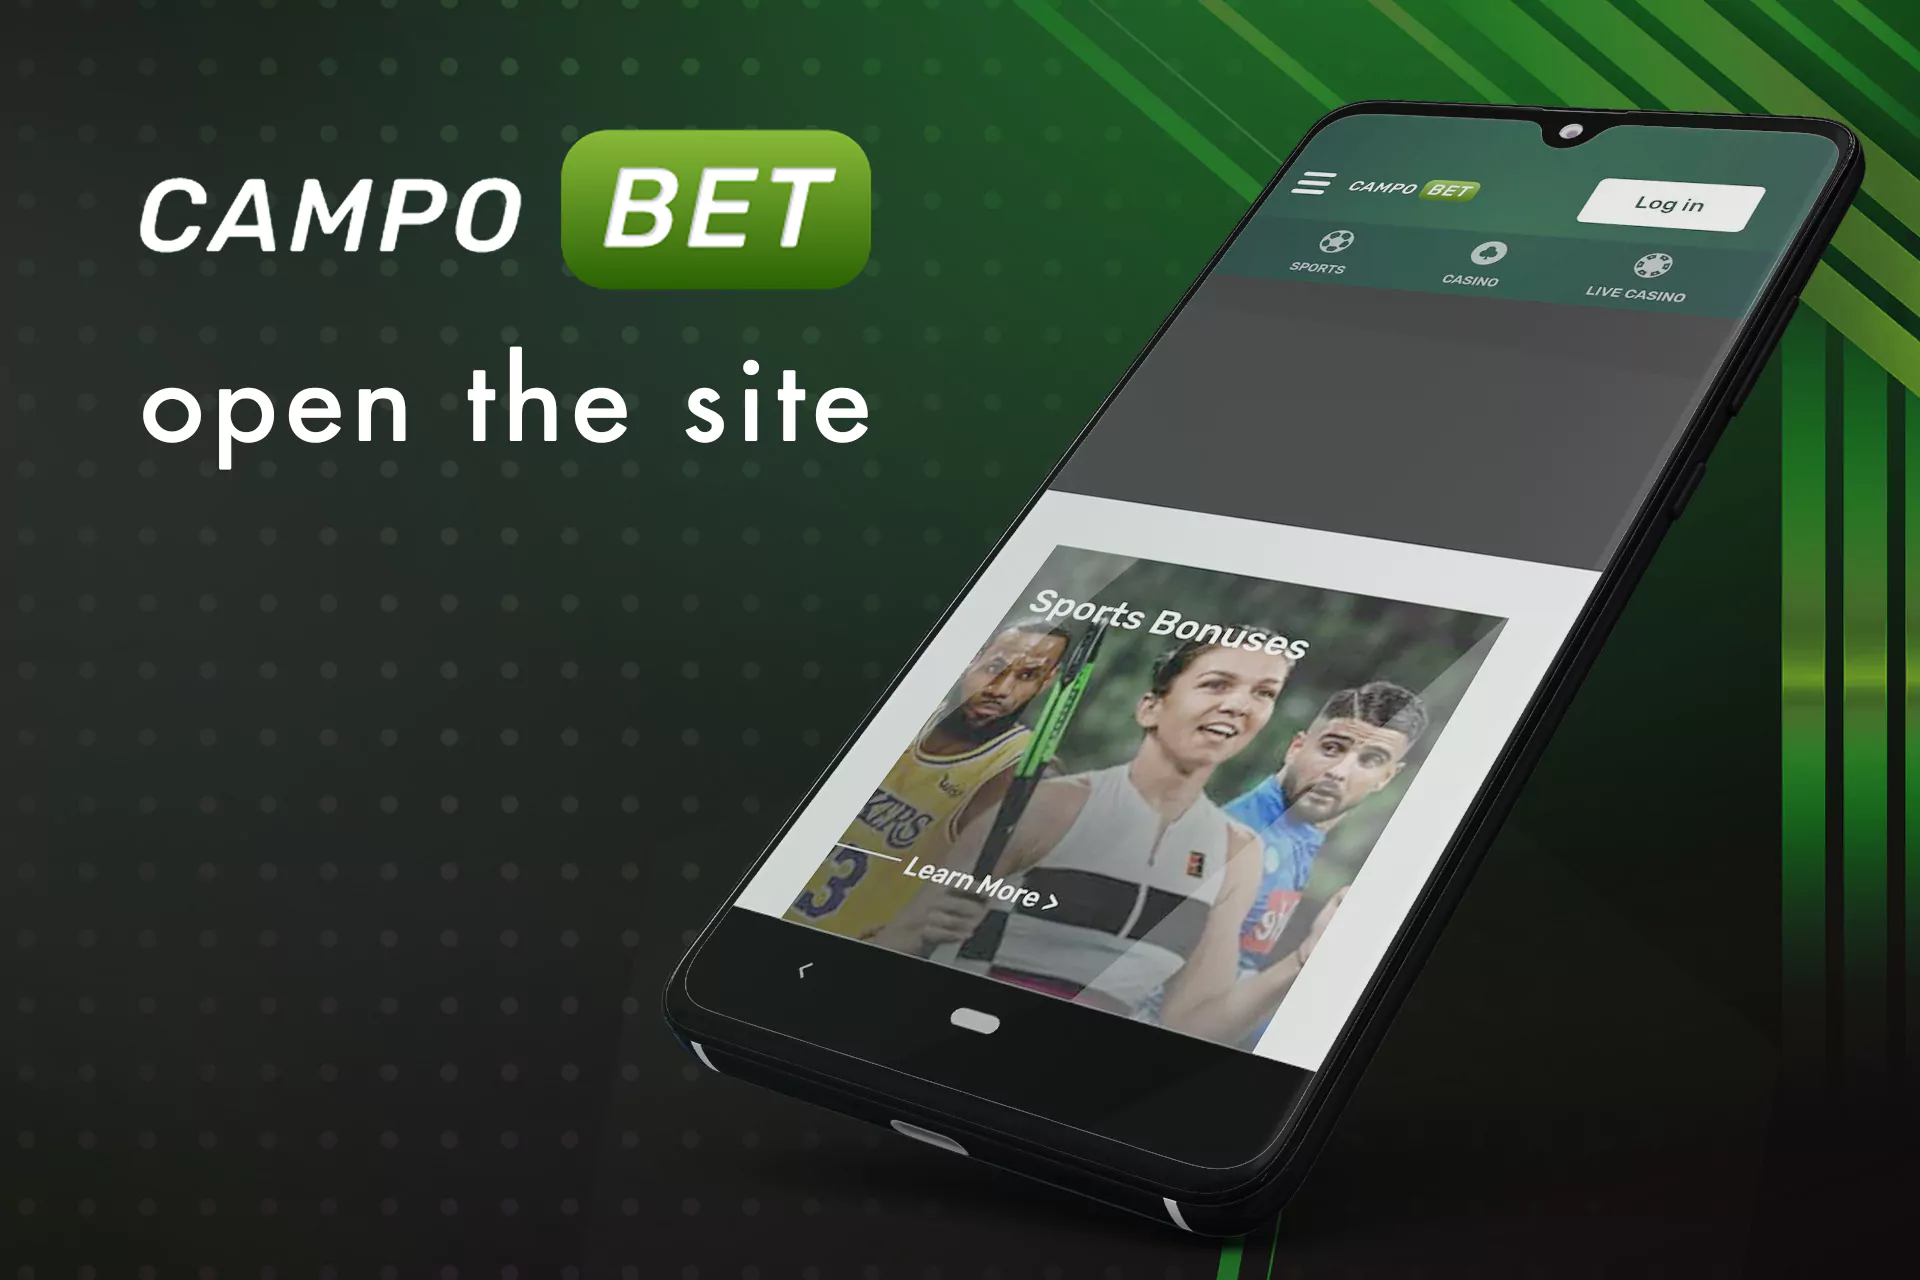 Open the site of Campobet in a mobile browser on your phone.